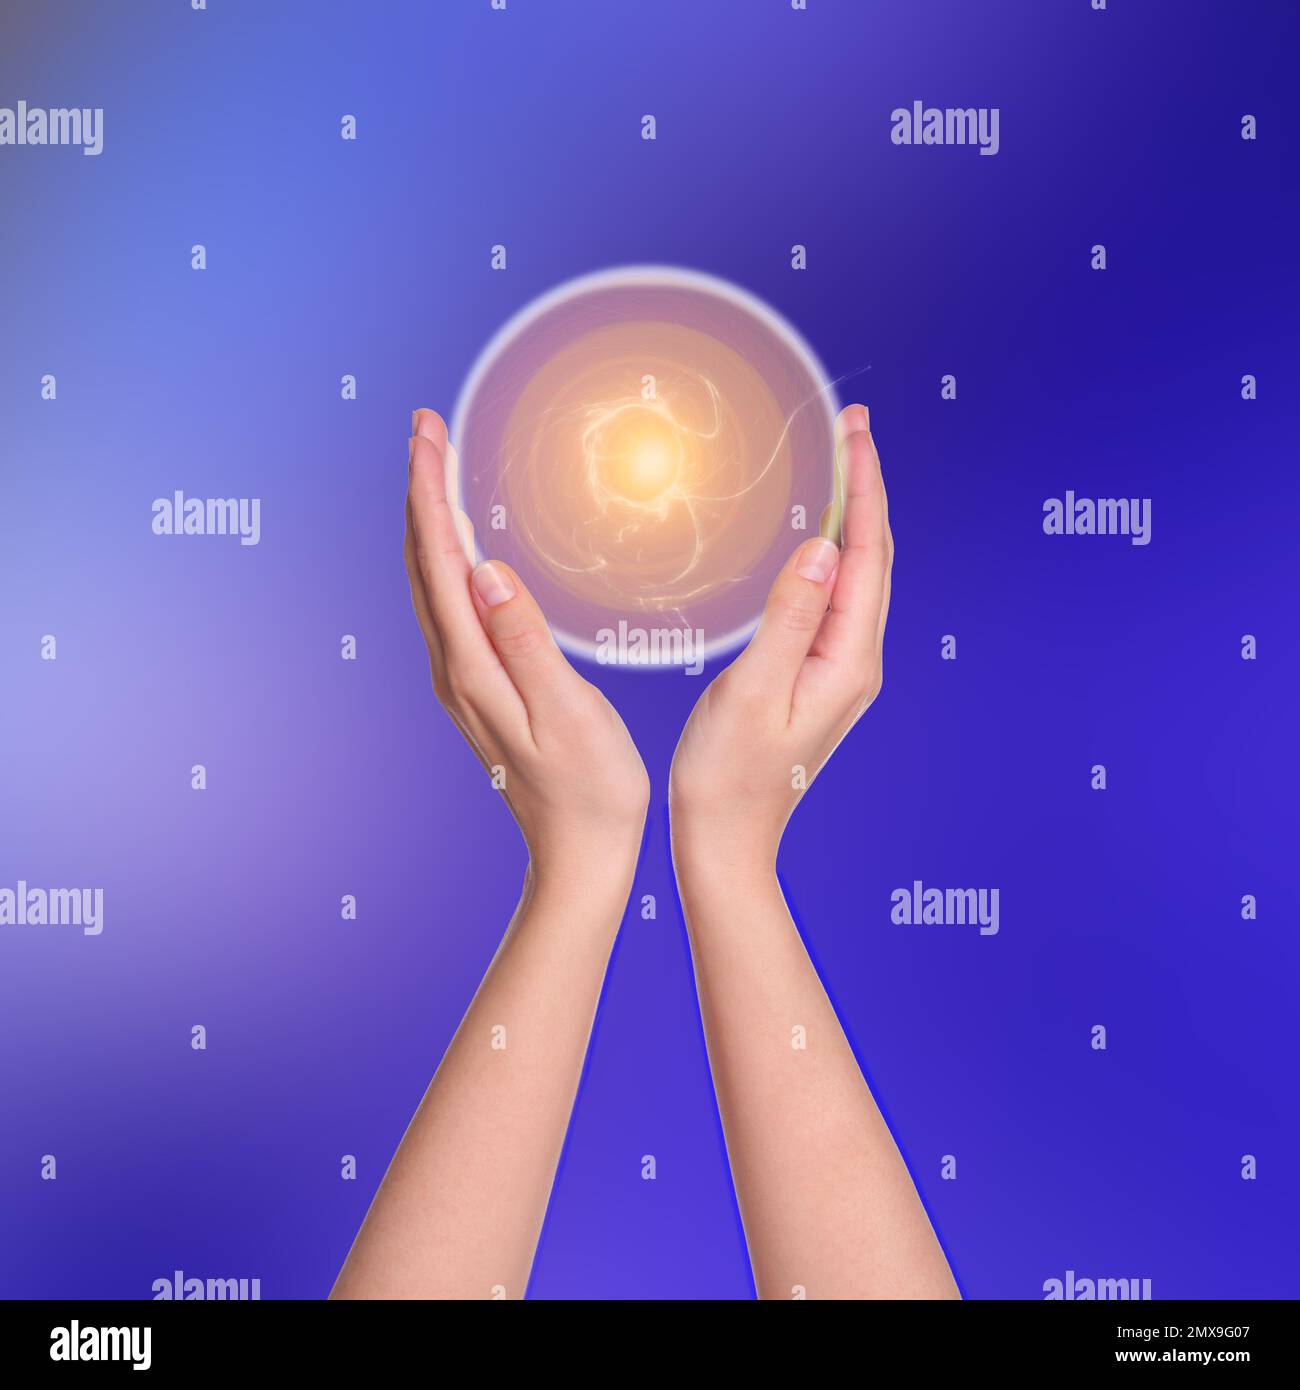 Woman holding concentrated healing energy in her hands, closeup Stock Photo